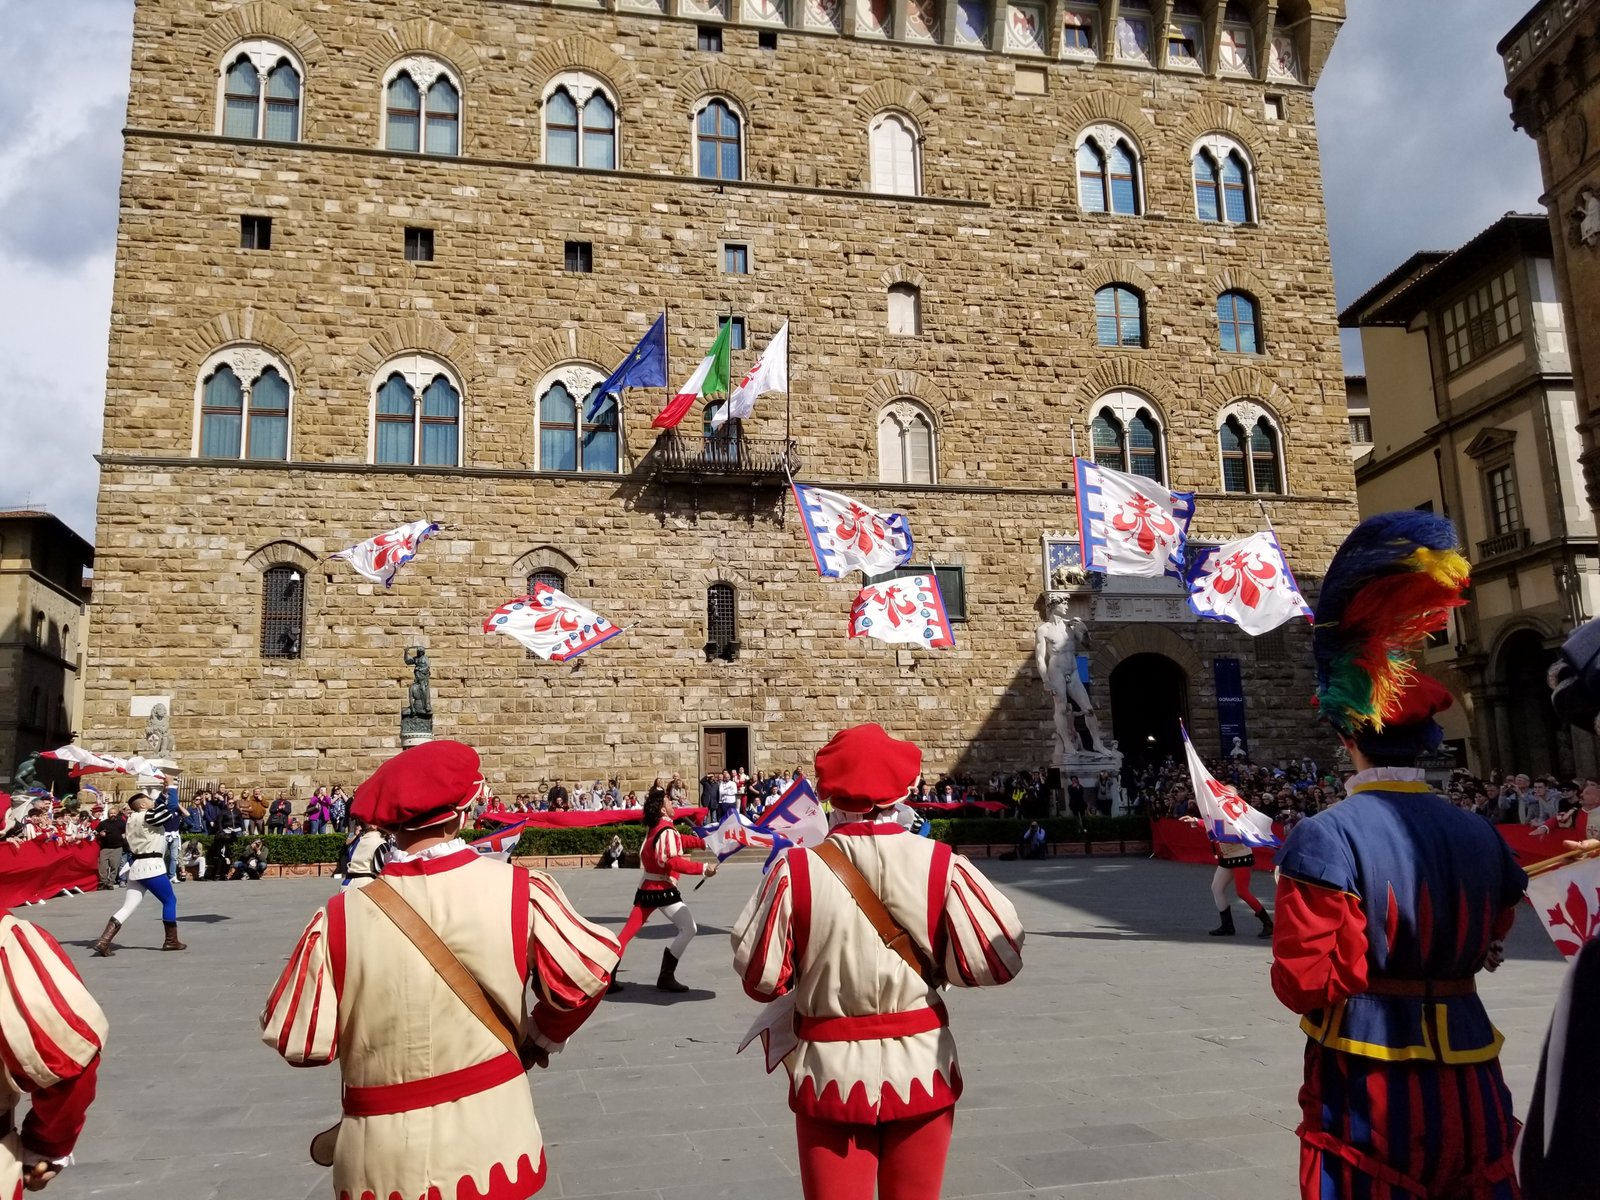 throwing of the flags, medieval tradition, ouritalianjourney.com